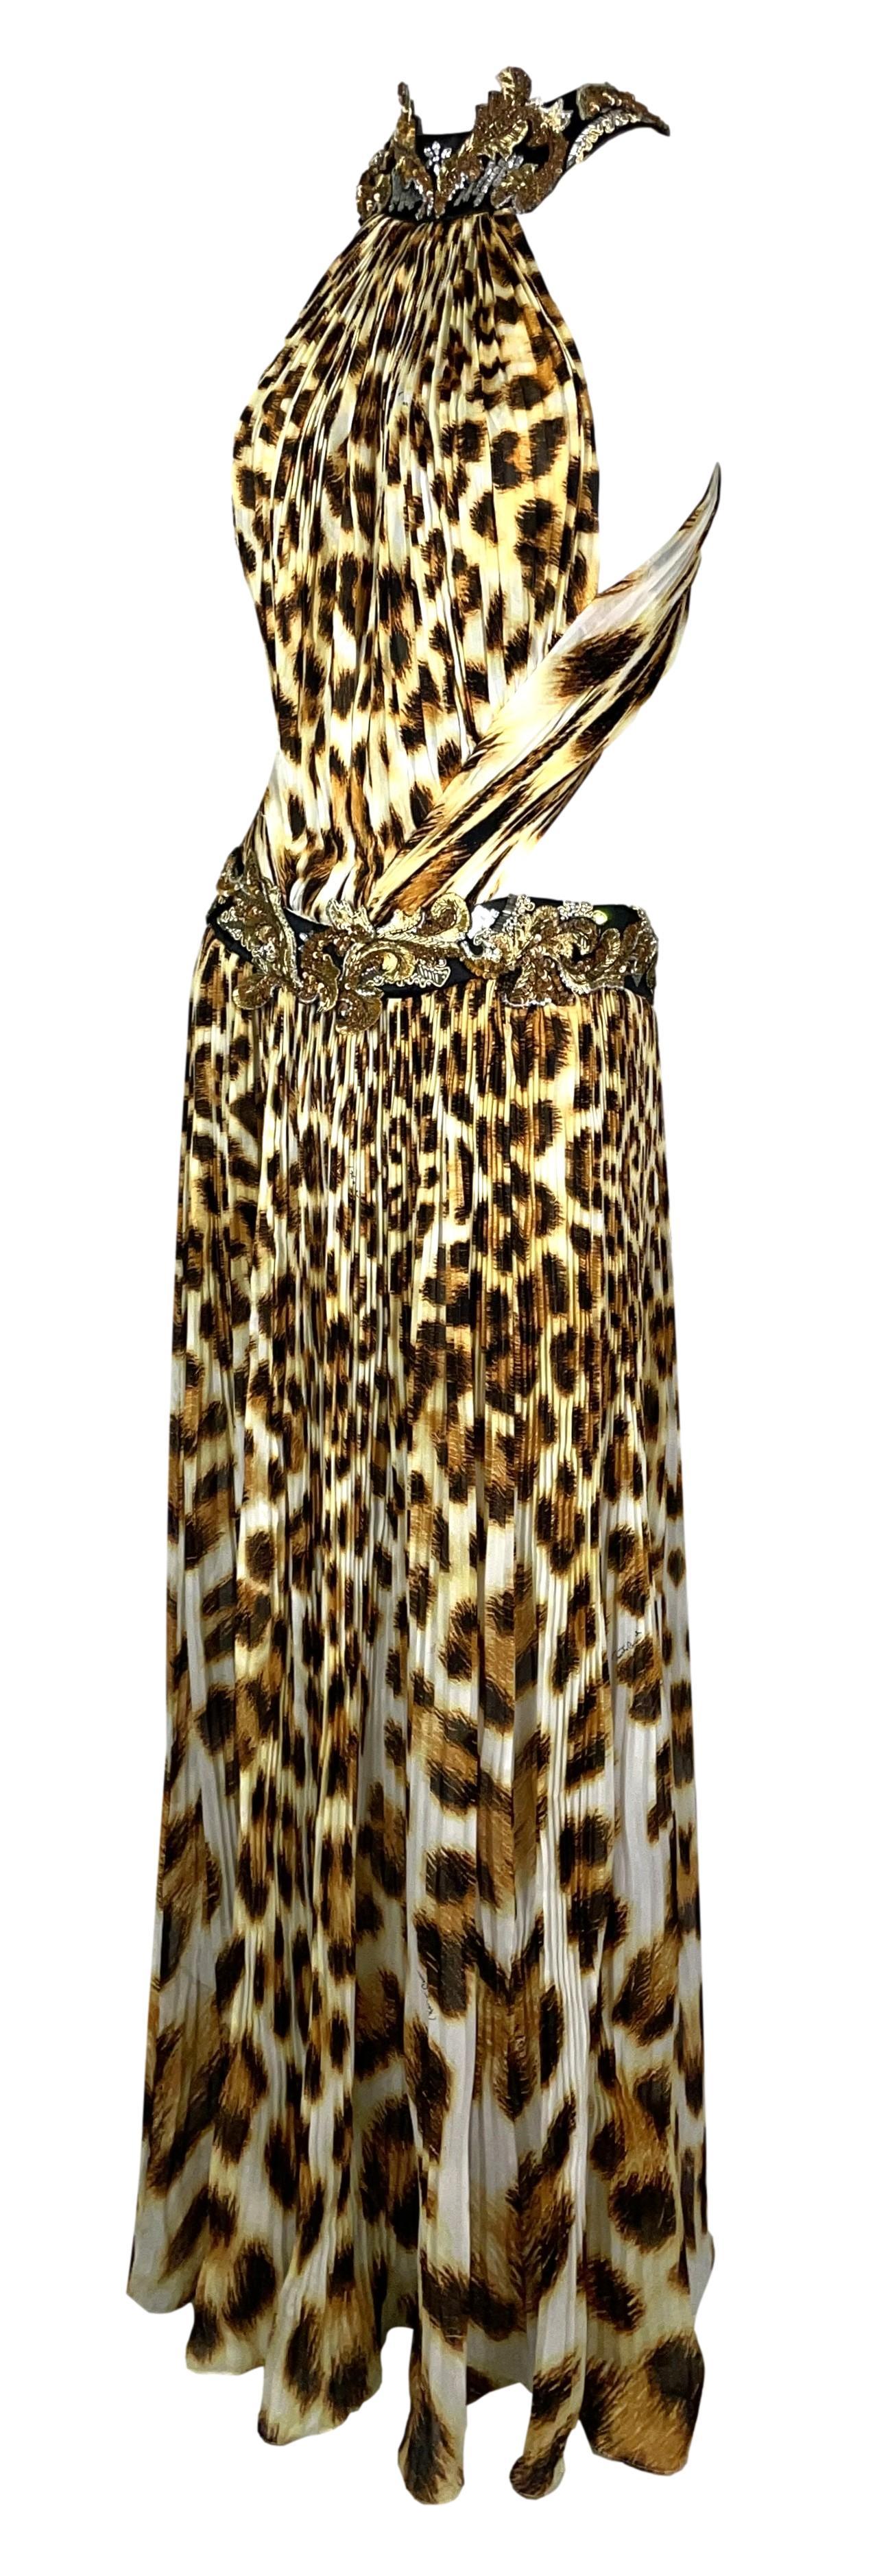 S/S 2007 Roberto Cavalli Runway Backless Embellished Silk Leopard Gown Dress In Fair Condition In Yukon, OK